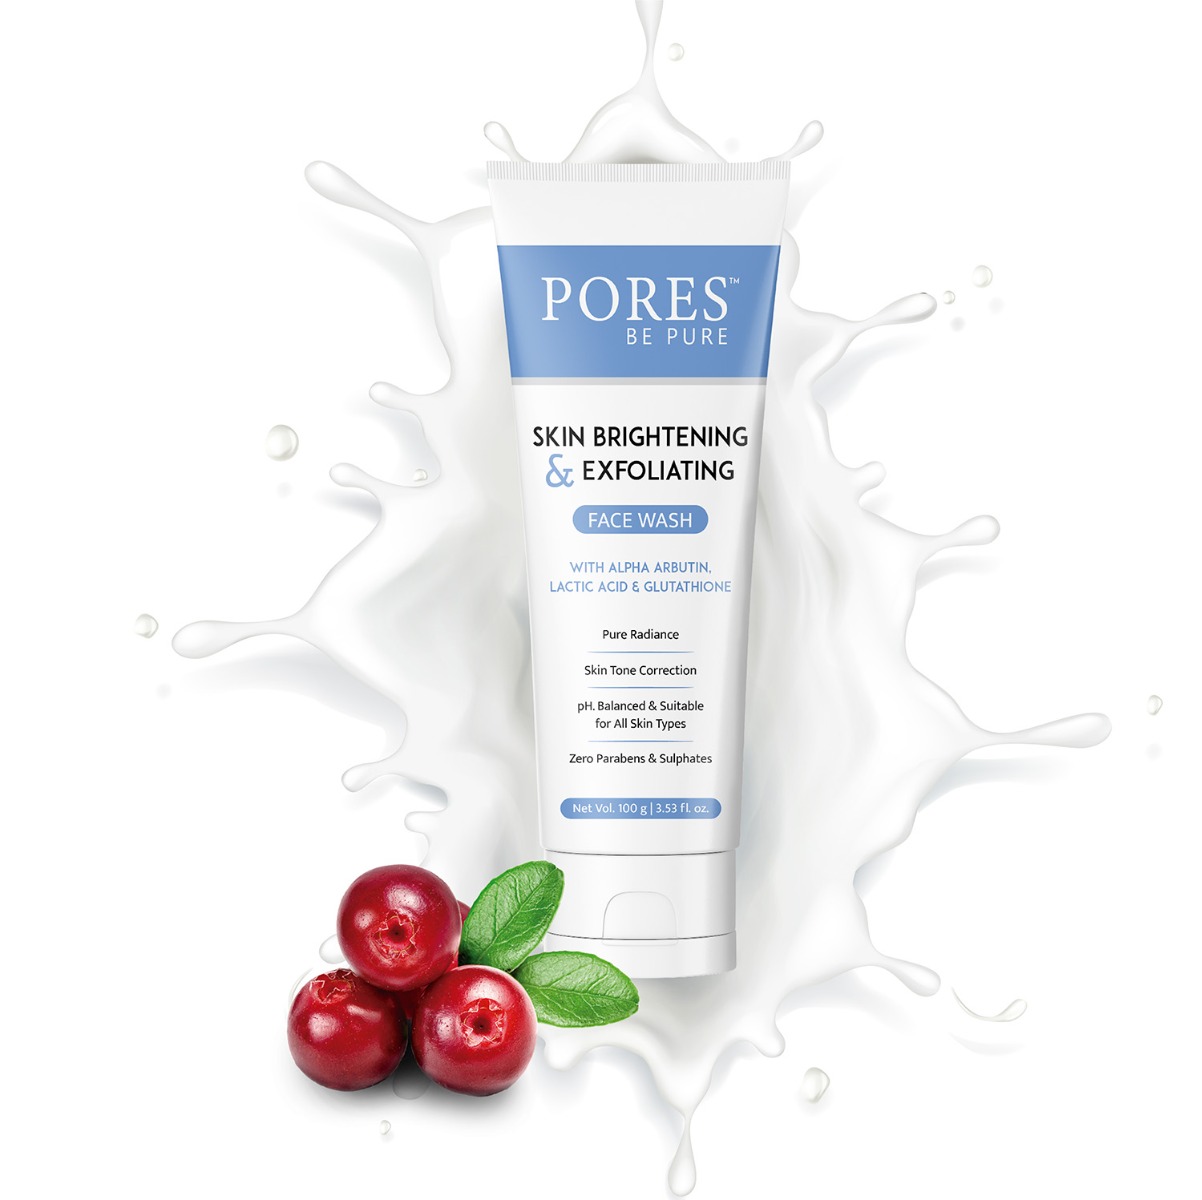 PORES Be Pure Skin Brightening & Exfoliating Face Wash, 100gm